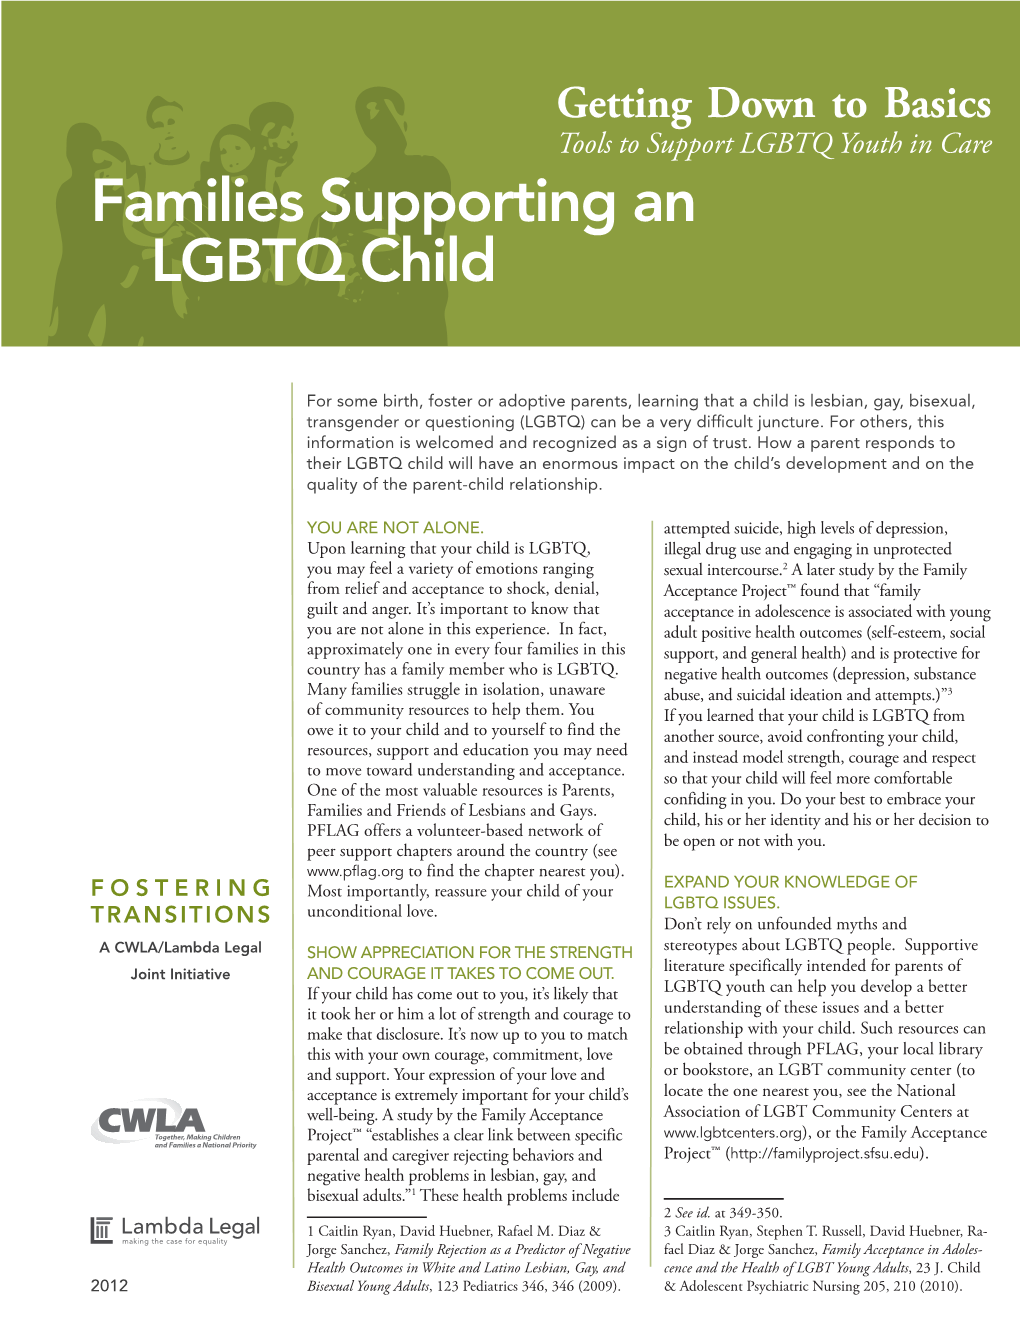 Families Supporting an LGBTQ Child